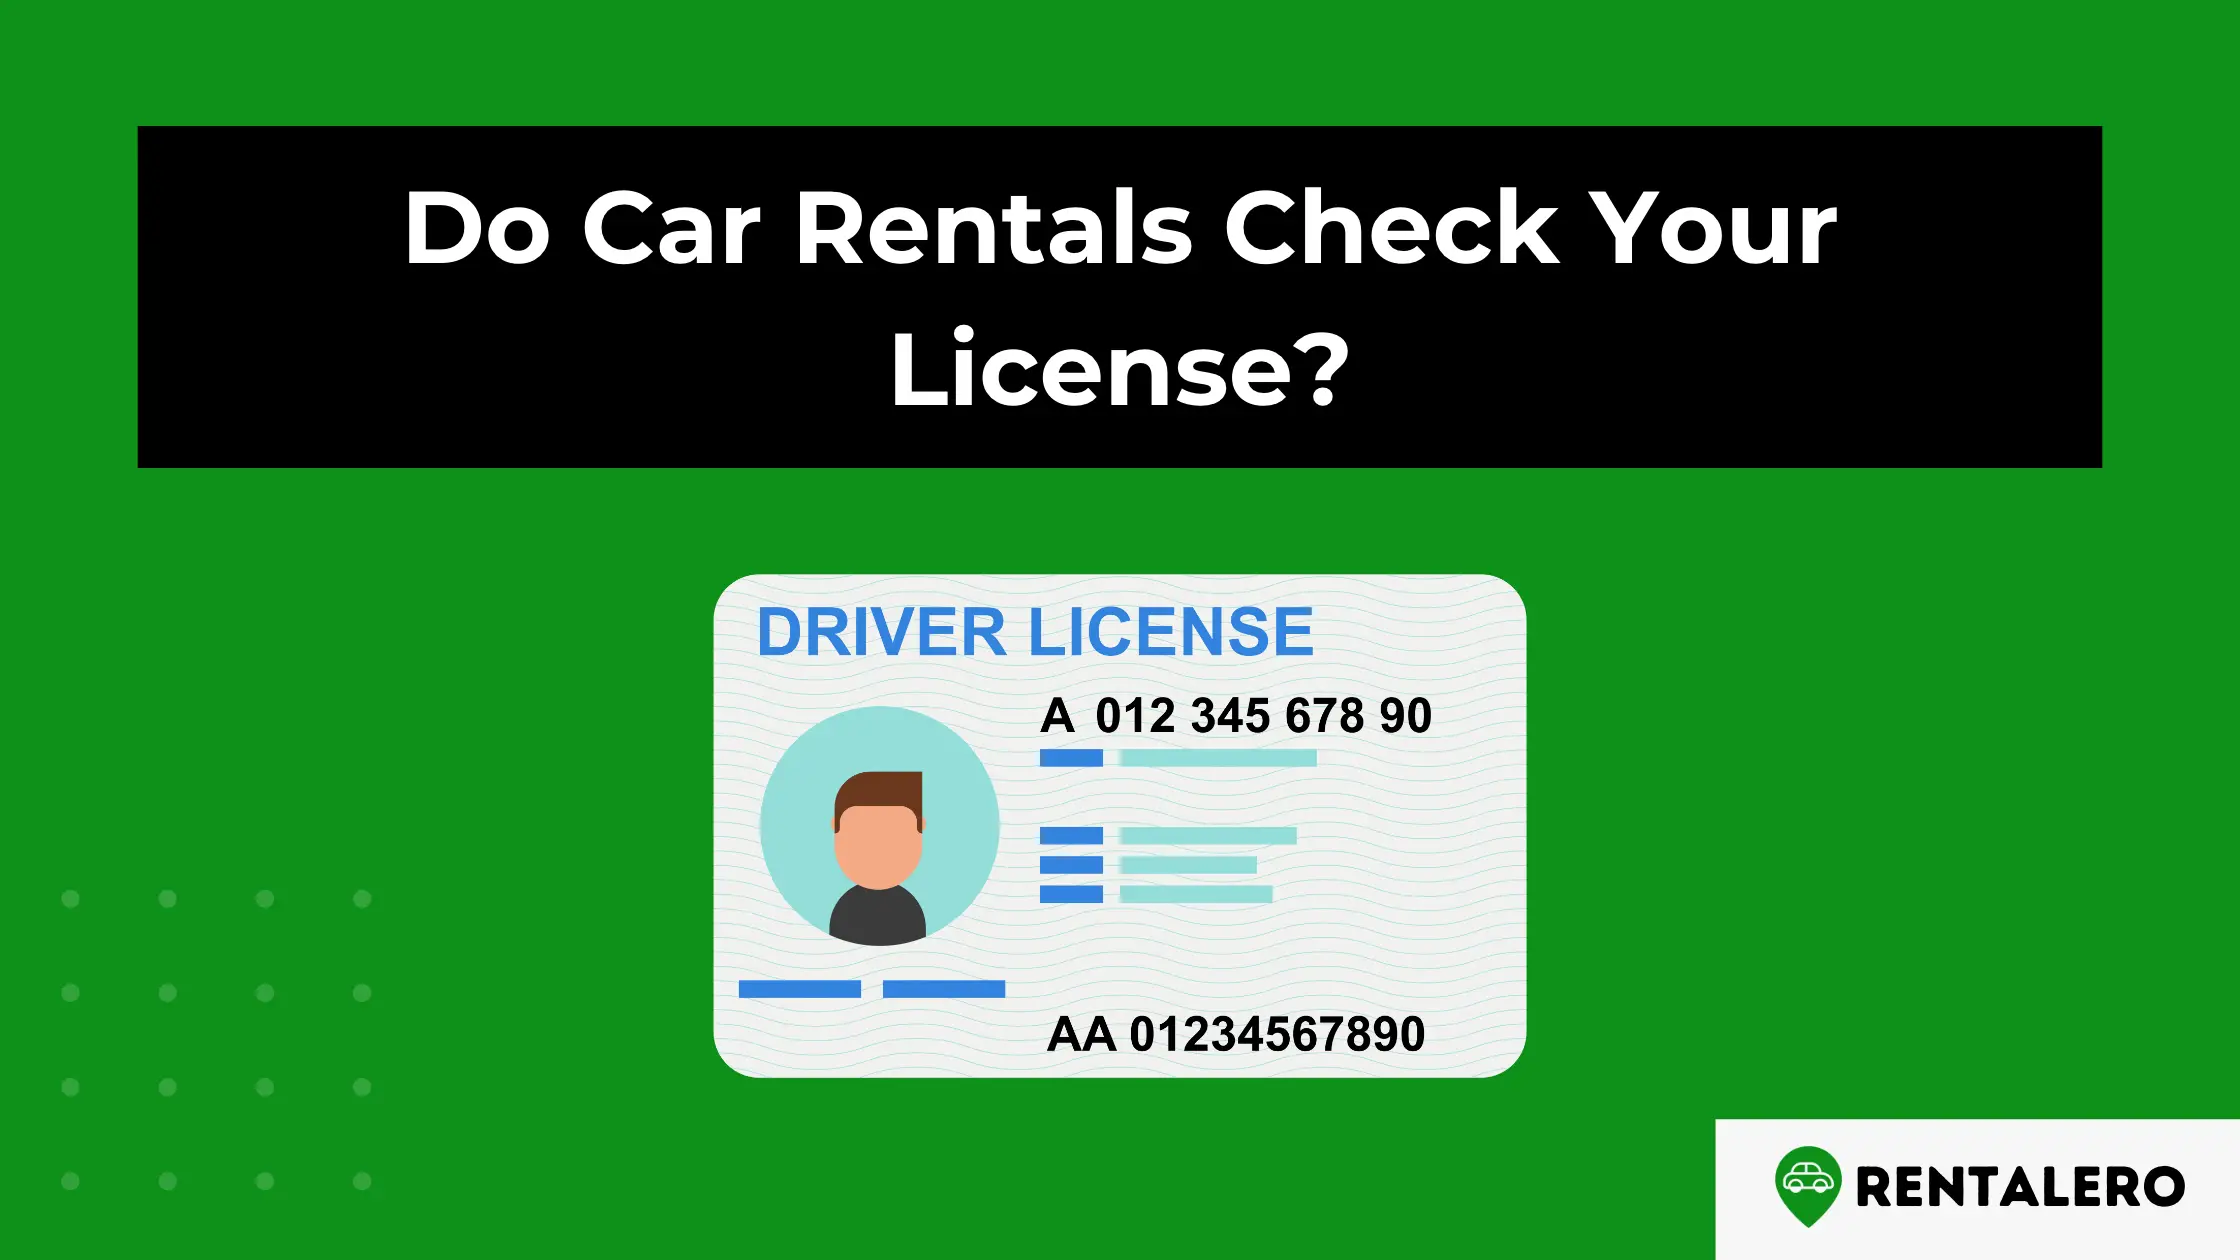 Do Car Rentals Check Your License? We Checked it!